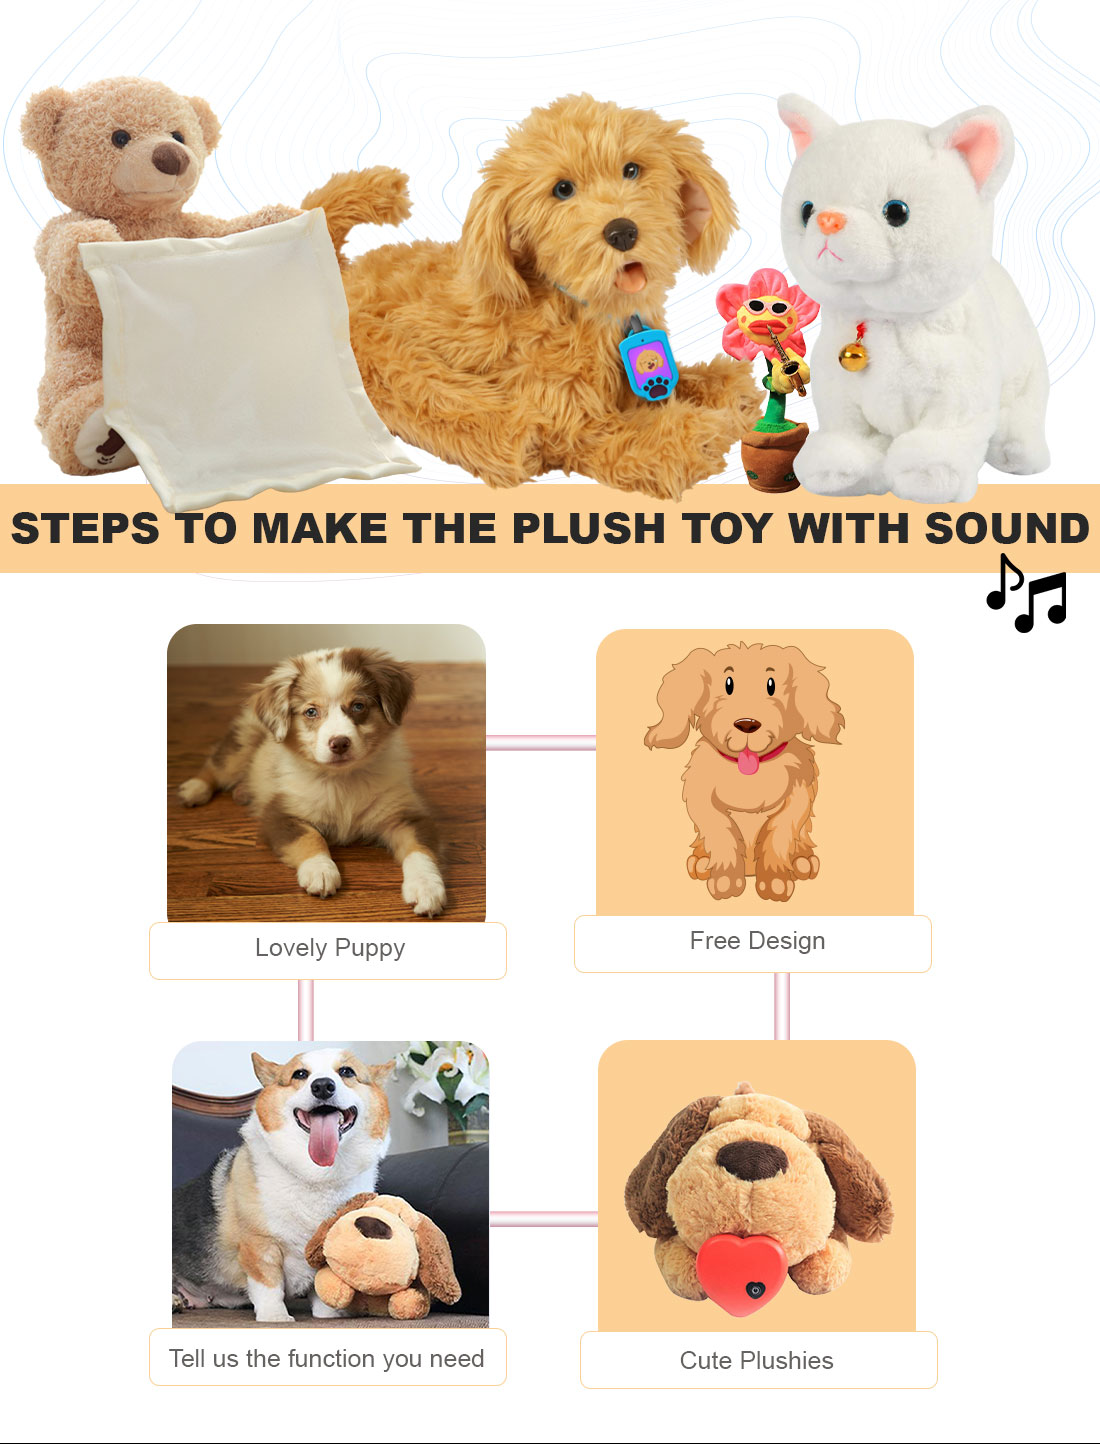 how to design plush toy singing repeat what you say